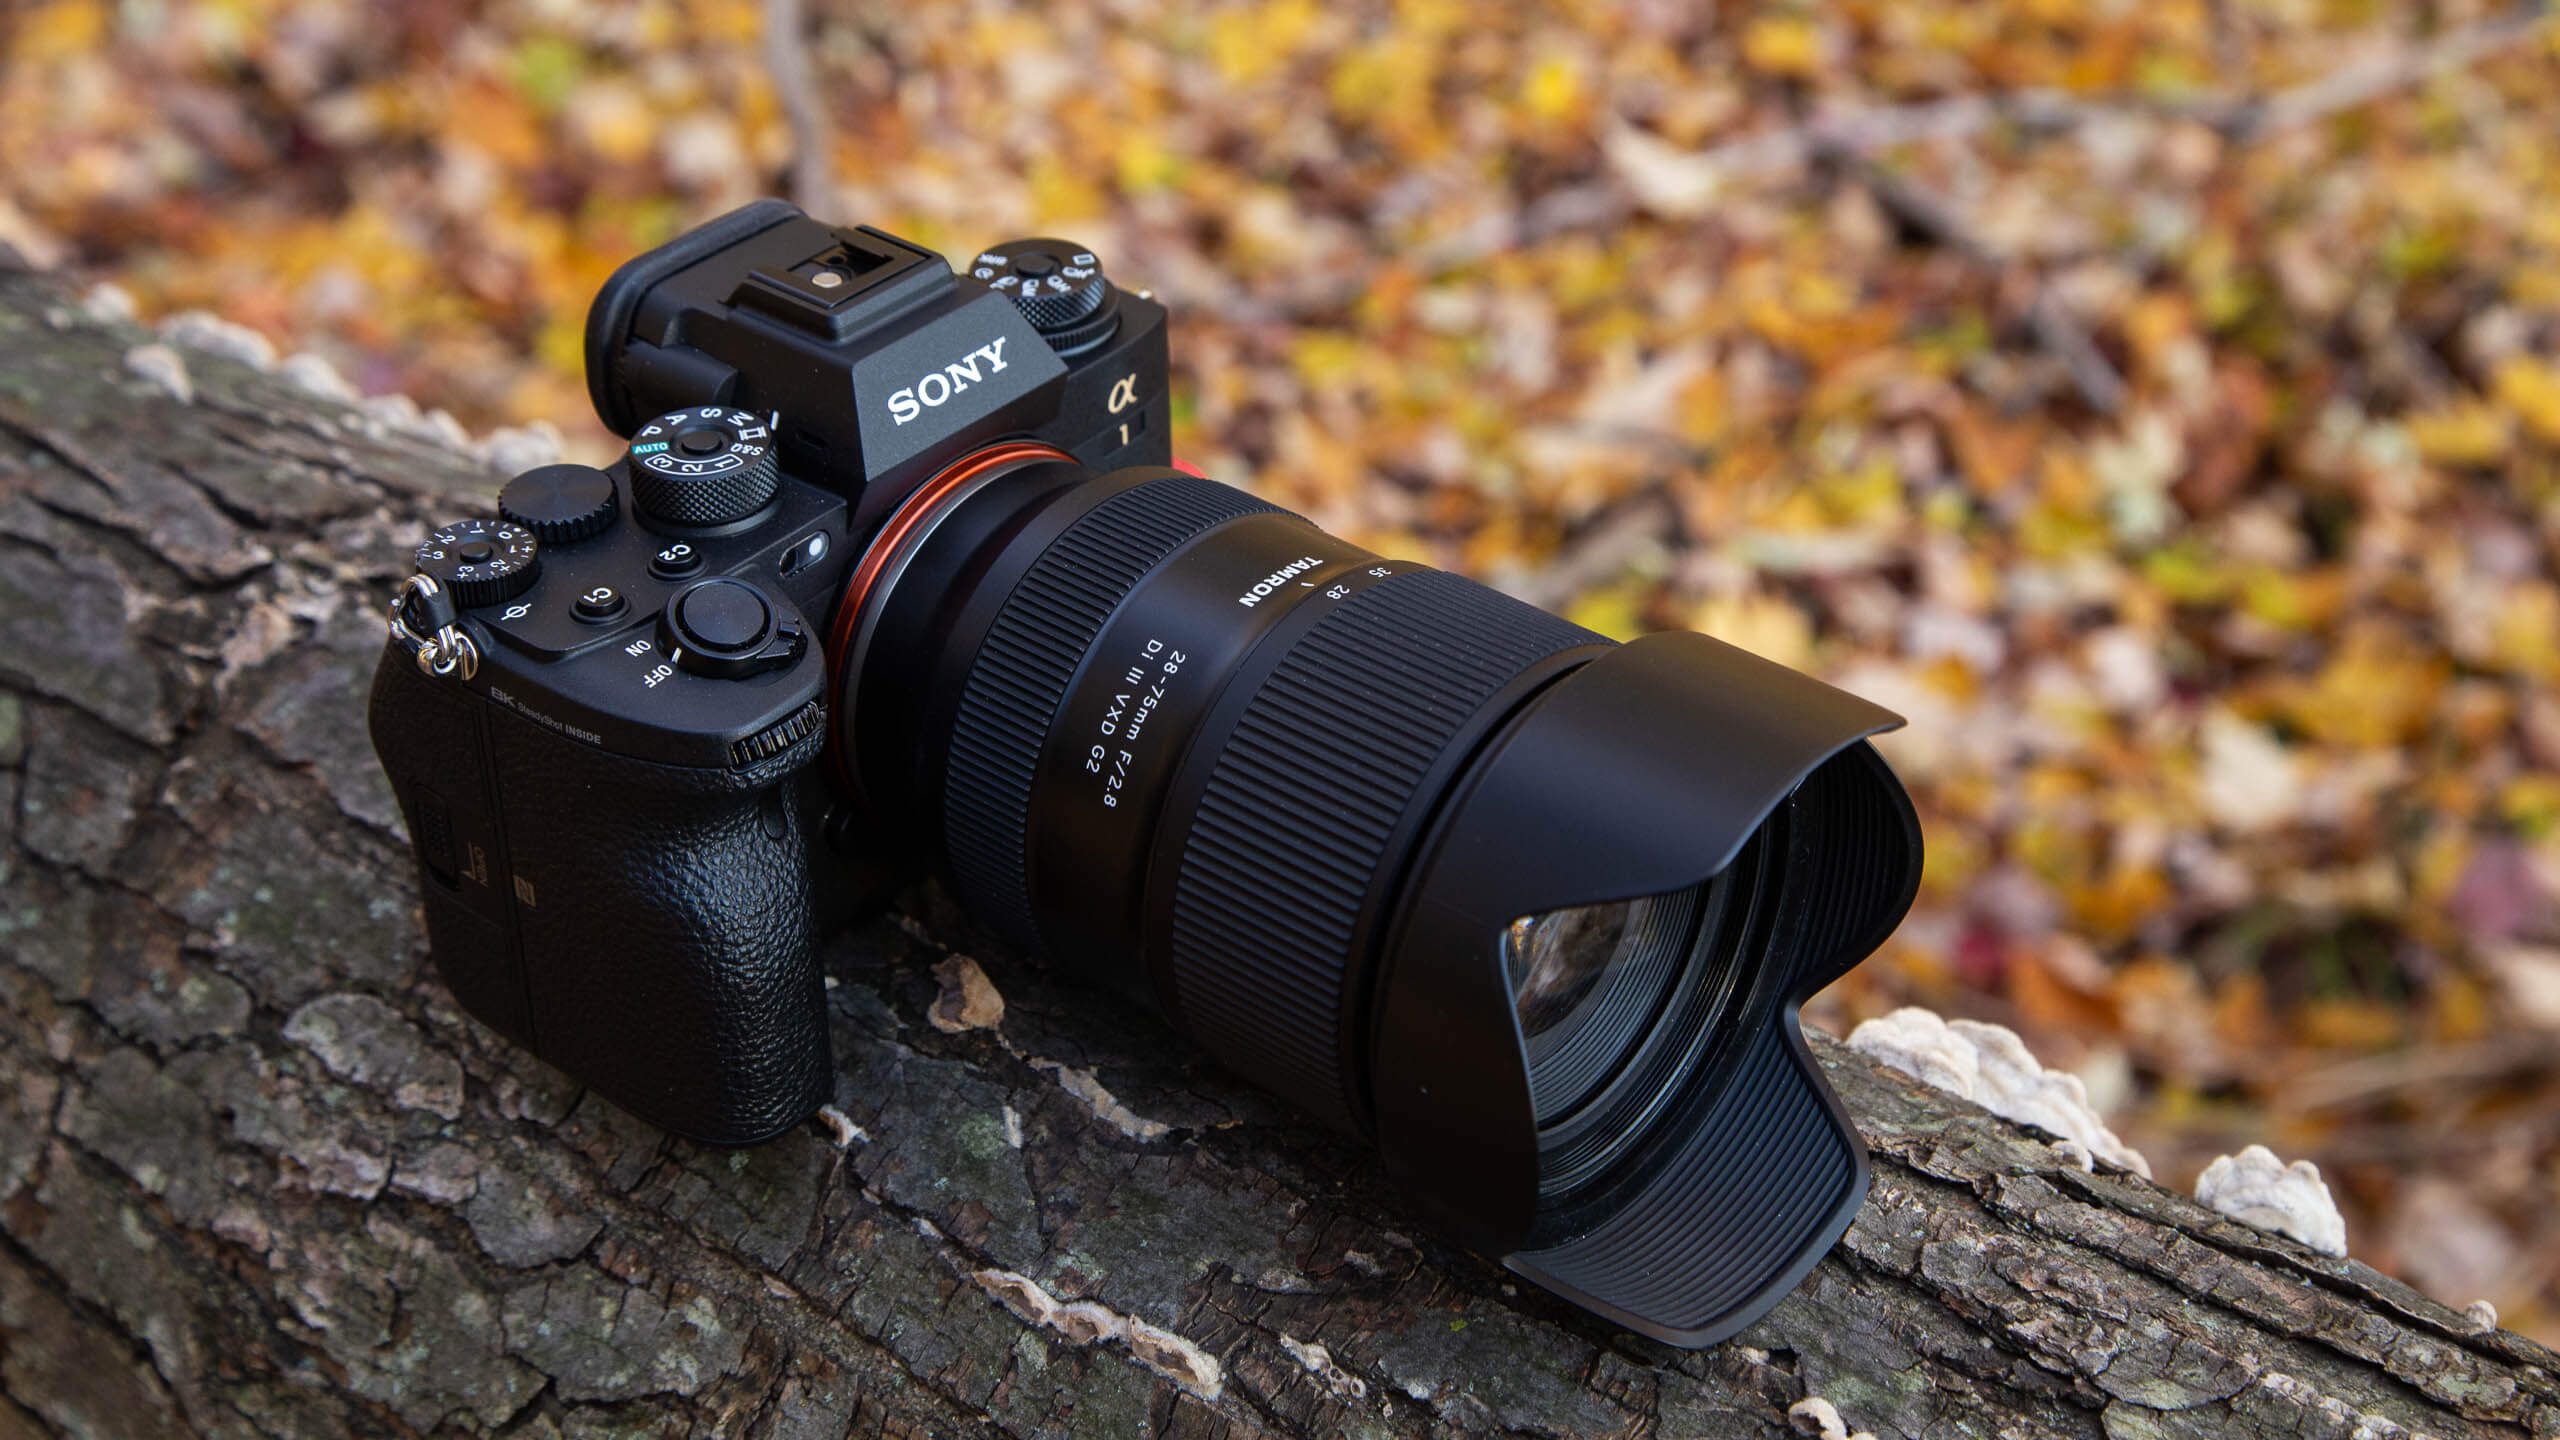 Tamron 28-75mm f/2.8 G2 for E-mount: Up-leveling the traditional